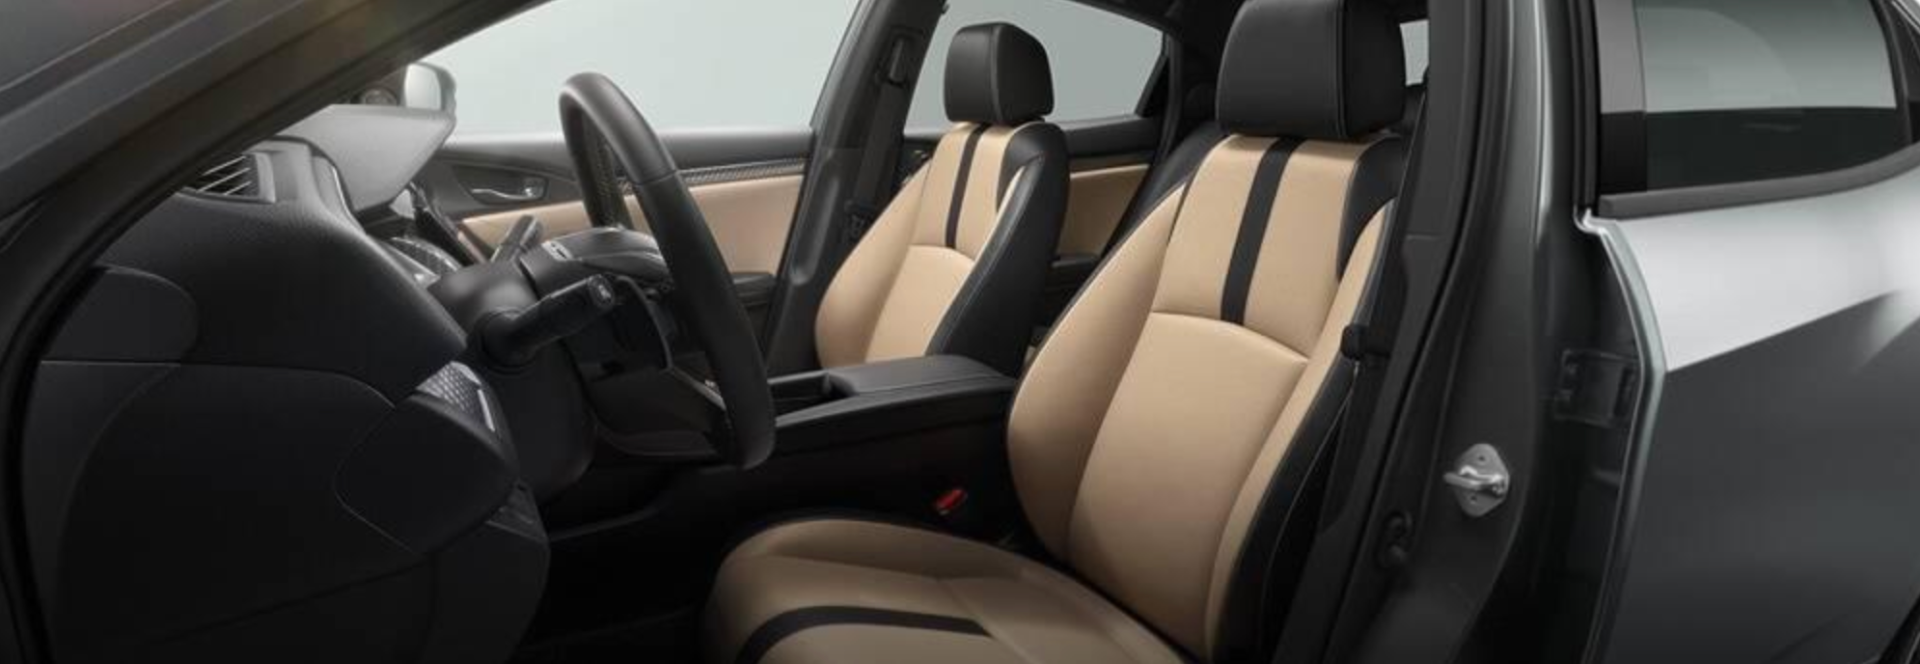 How to Take Care of Leather Car Seats